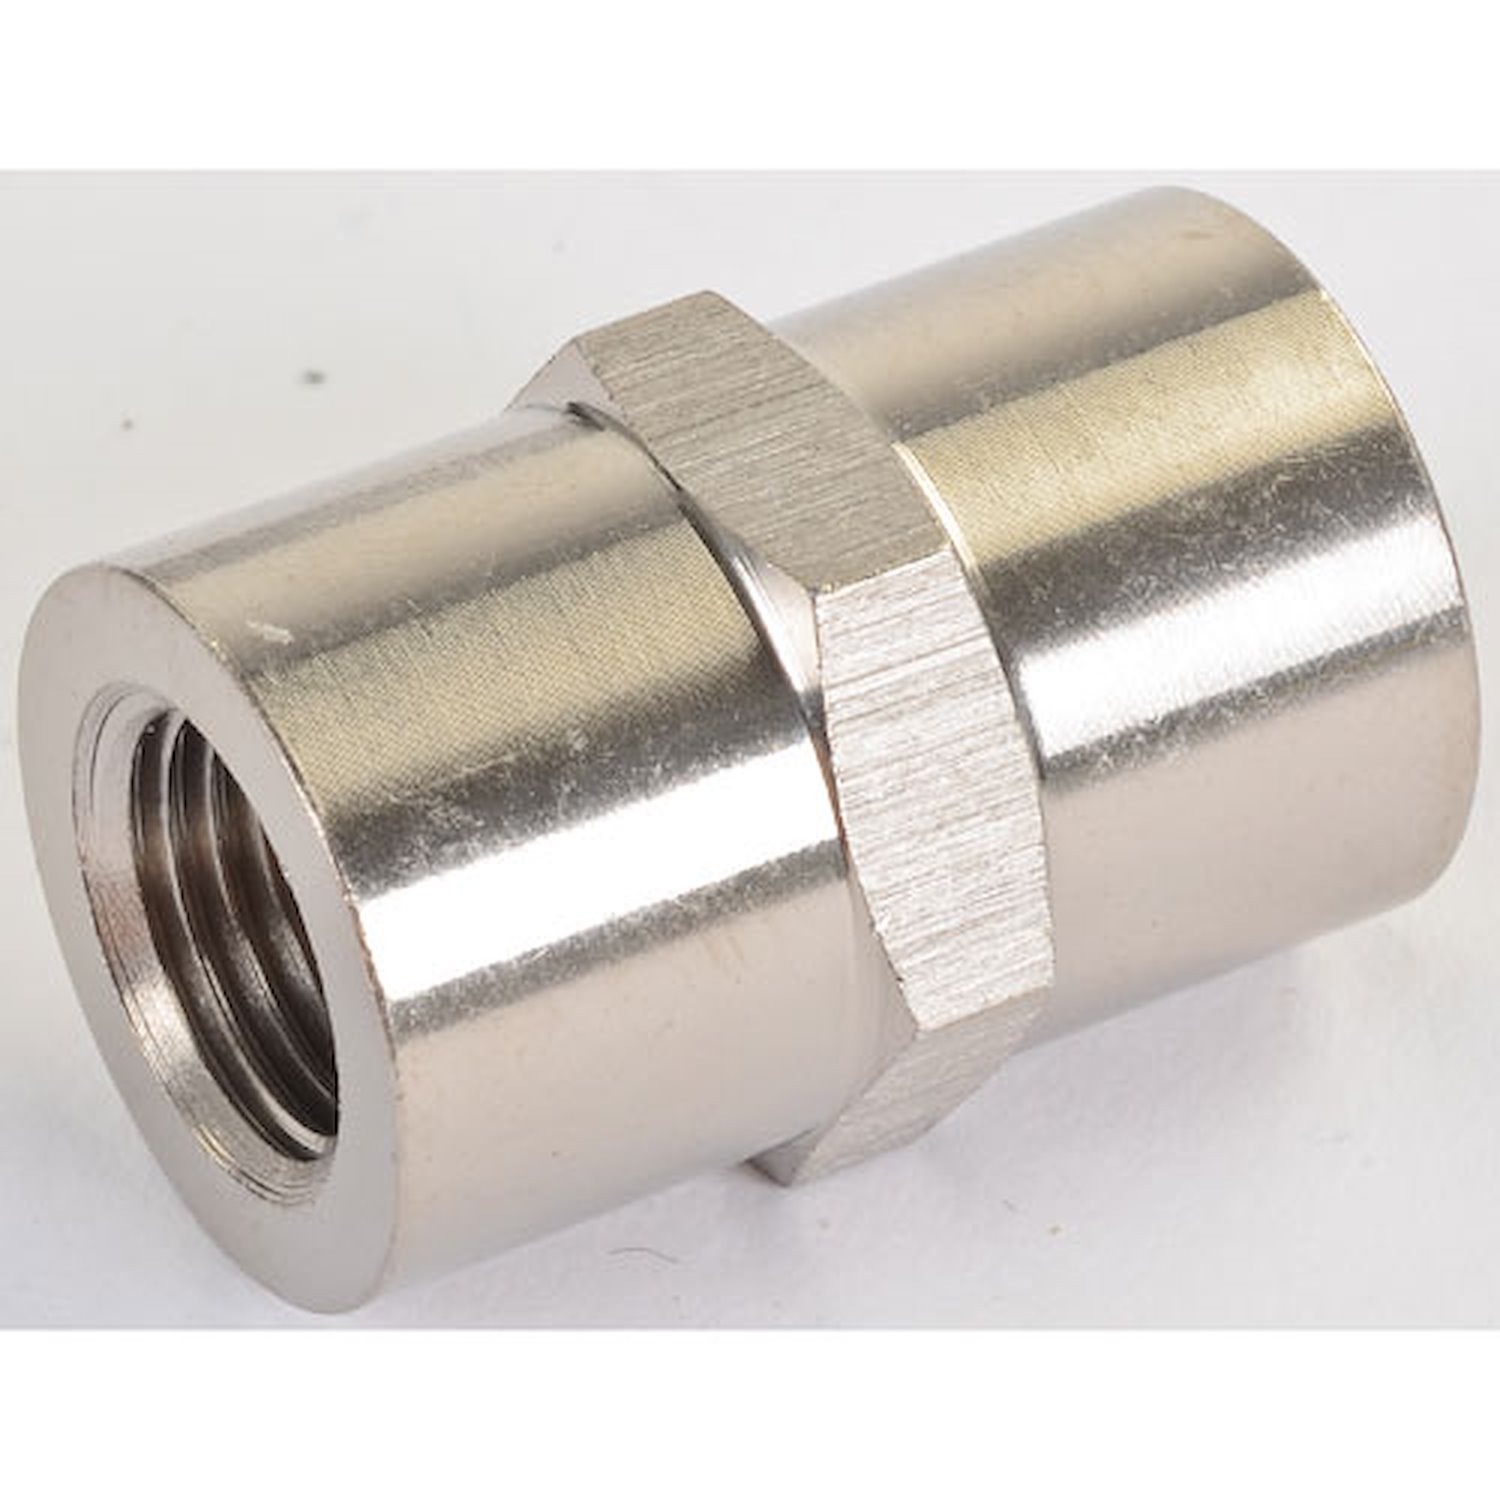 NPT to NPT Straight Union Fitting [1/8 in. NPT Female to 1/8 in. NPT Female, Nickle]